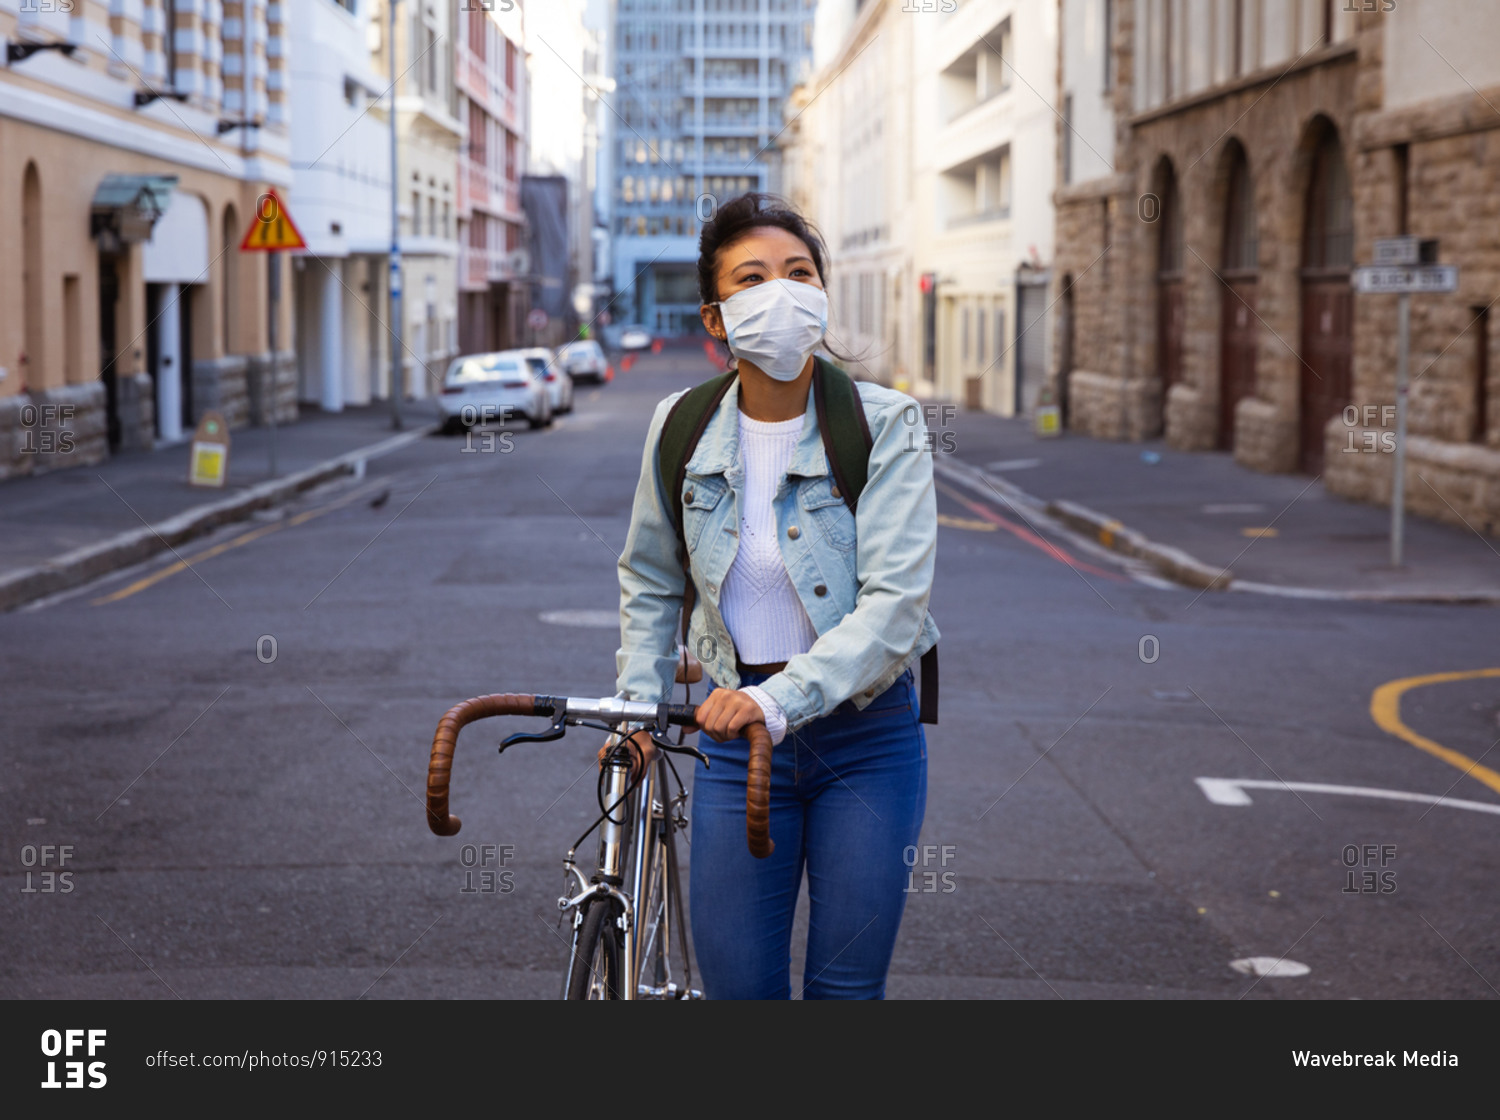 Front view of a mixed race woman with dark hair out and about in the city streets during the day, wearing a face mask against air pollution and coronavirus, walking with her bicycle with buildings in the background.